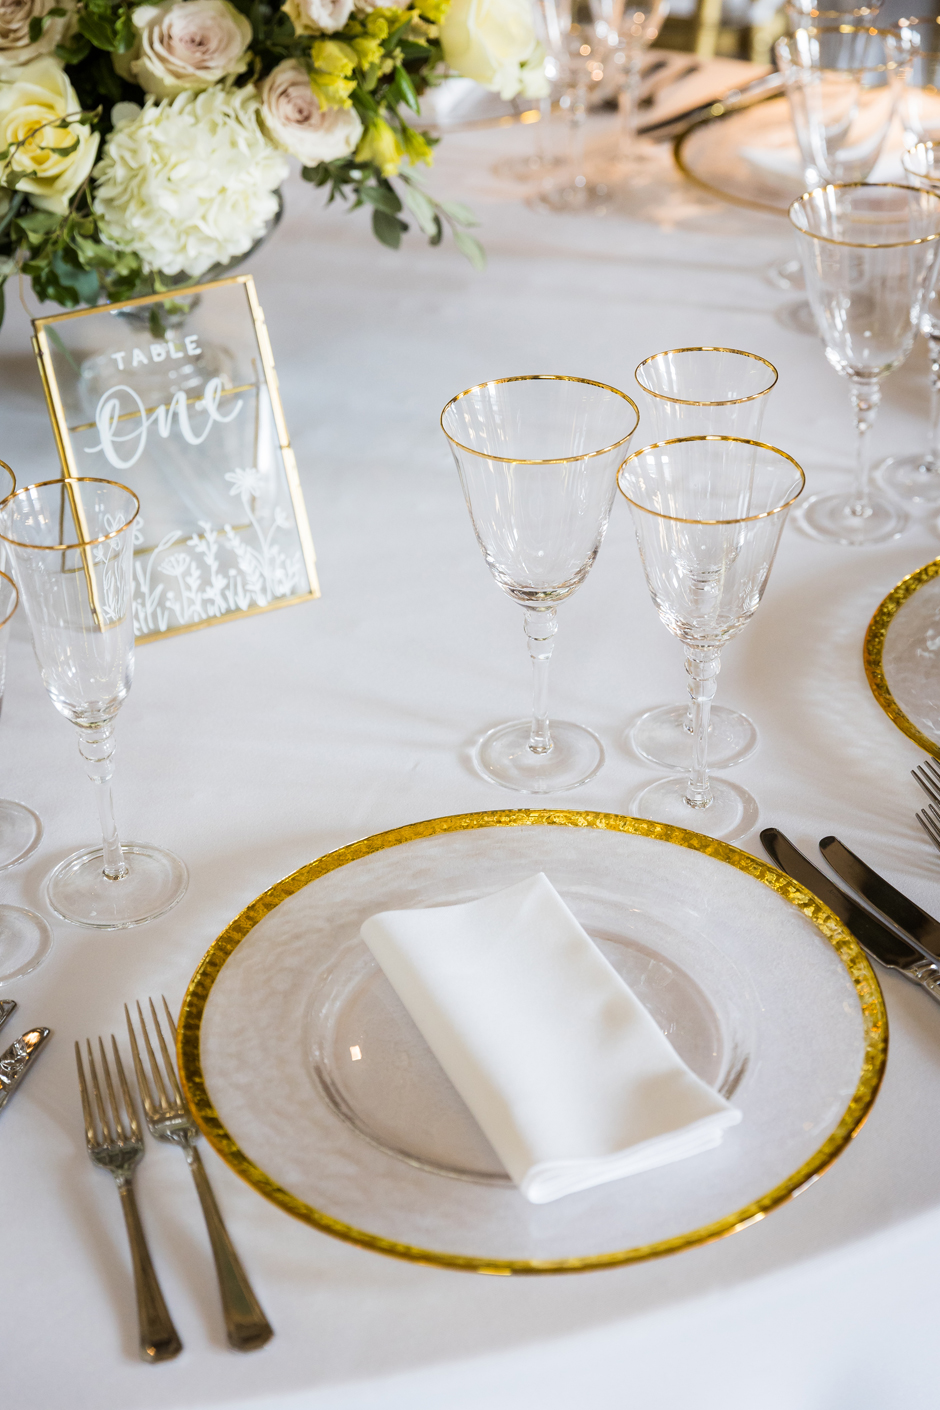 Gold trim glasses with white Essential linen & gold trim charger plate